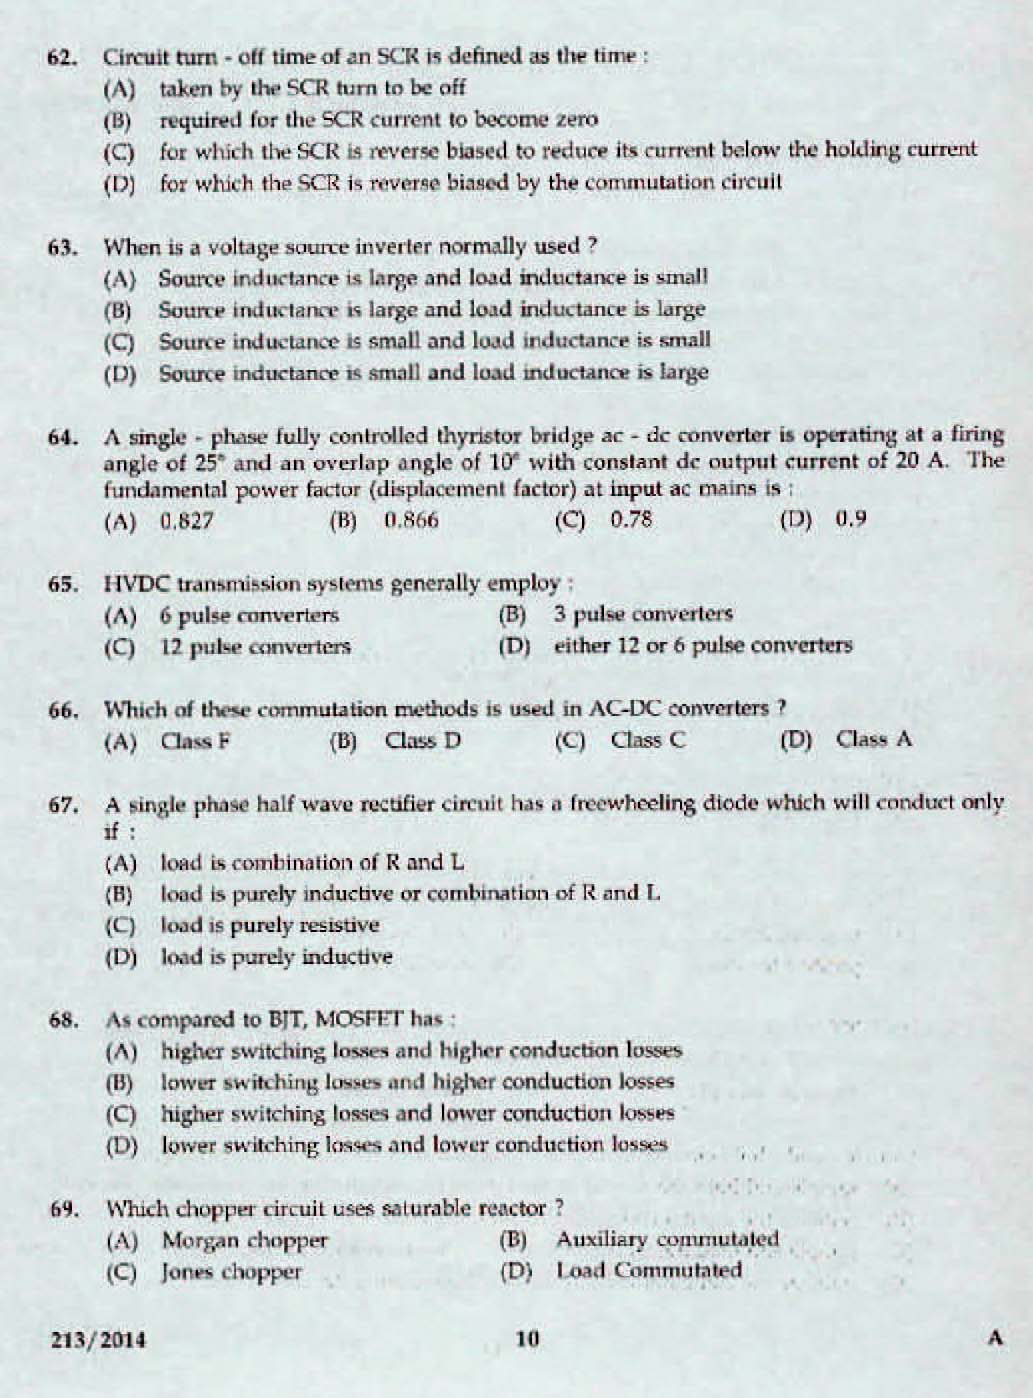 Kerala PSC Assistant Engineer Electrical Exam 2014 Question Paper Code 2132014 8